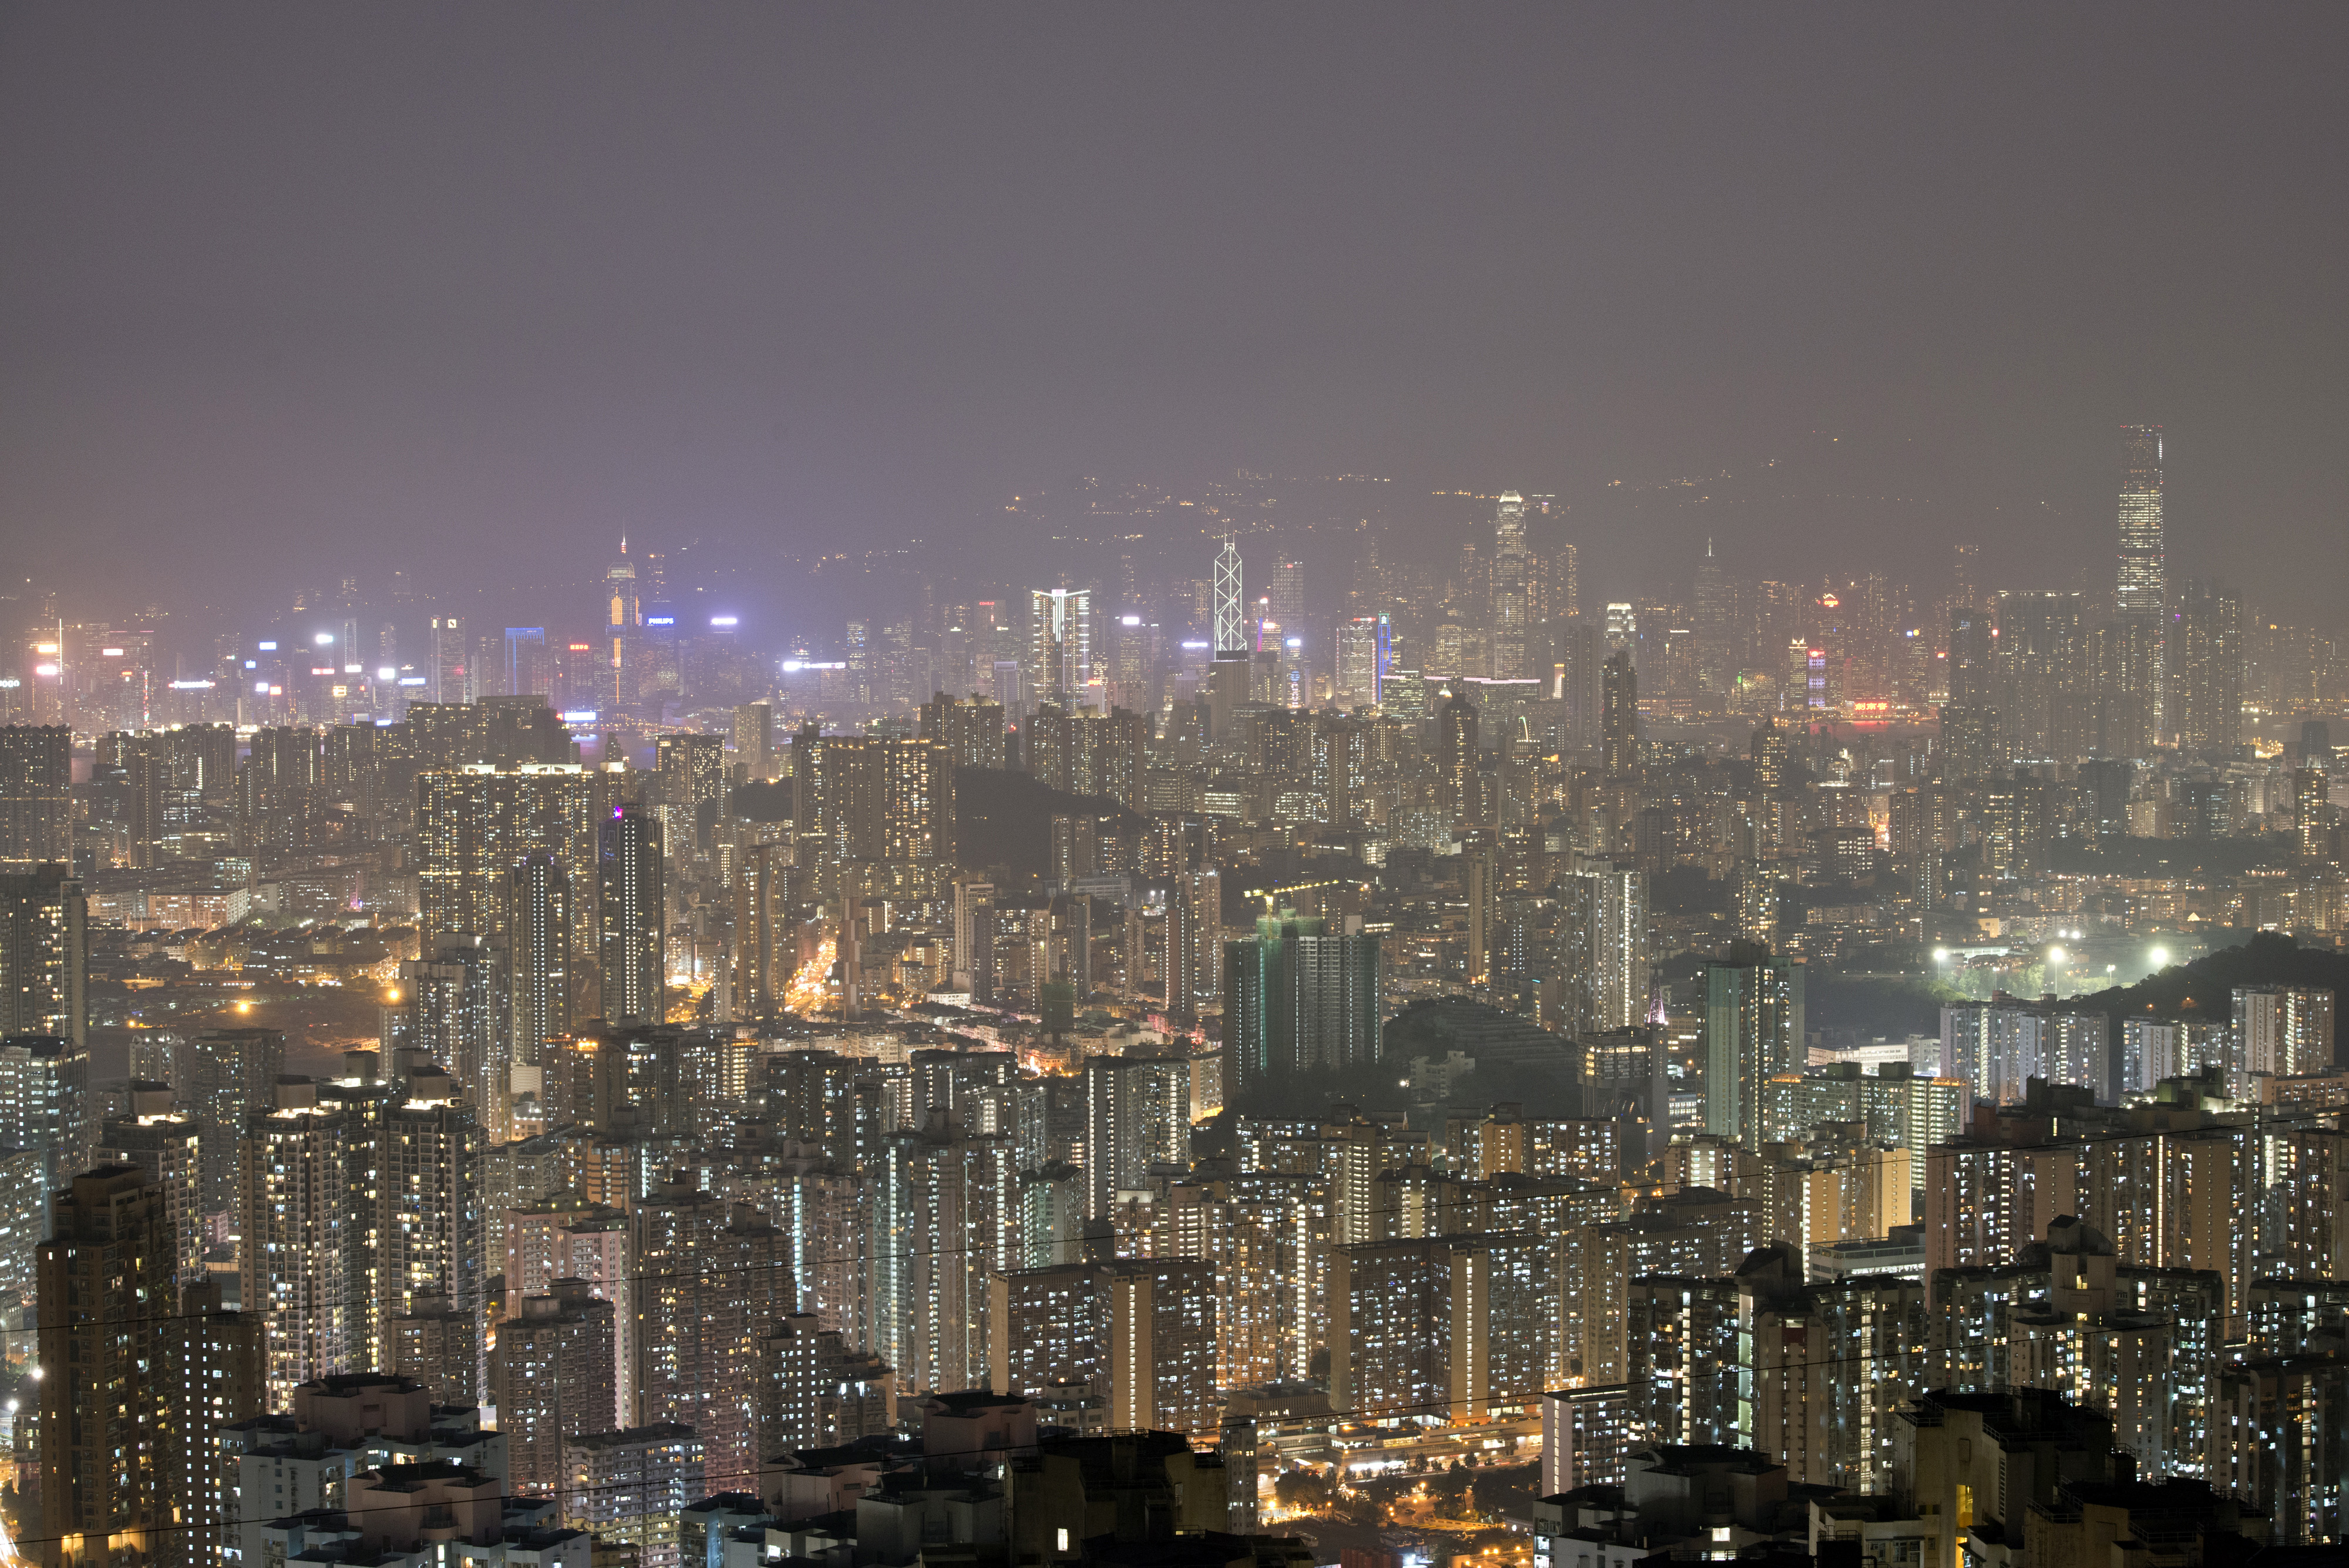 This long exposure picture shows apartment buildings and office blocks clustered tightly together in Hong Kong's Kowloon district, with the famous skyline of Hong Kong island in the background, on October 28, 2013. (Alex Ogle—‚AFP/Getty Images)